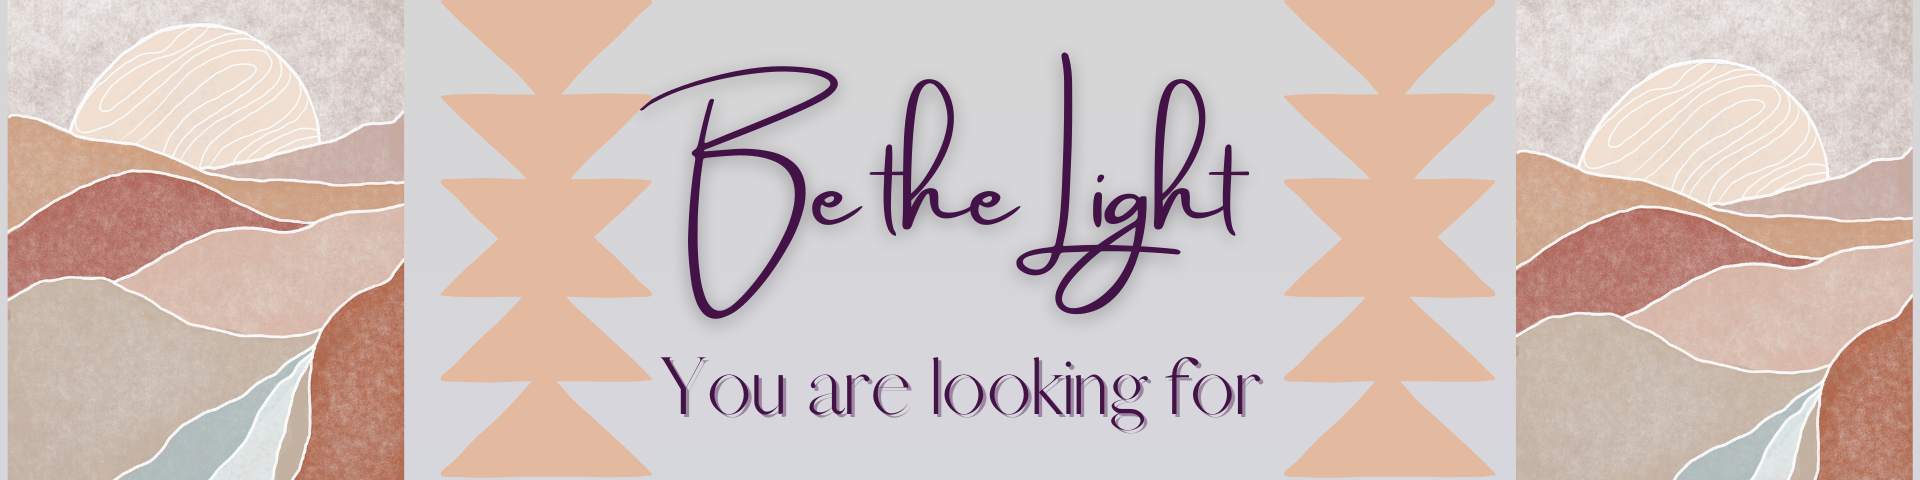 Be the light you are looking for